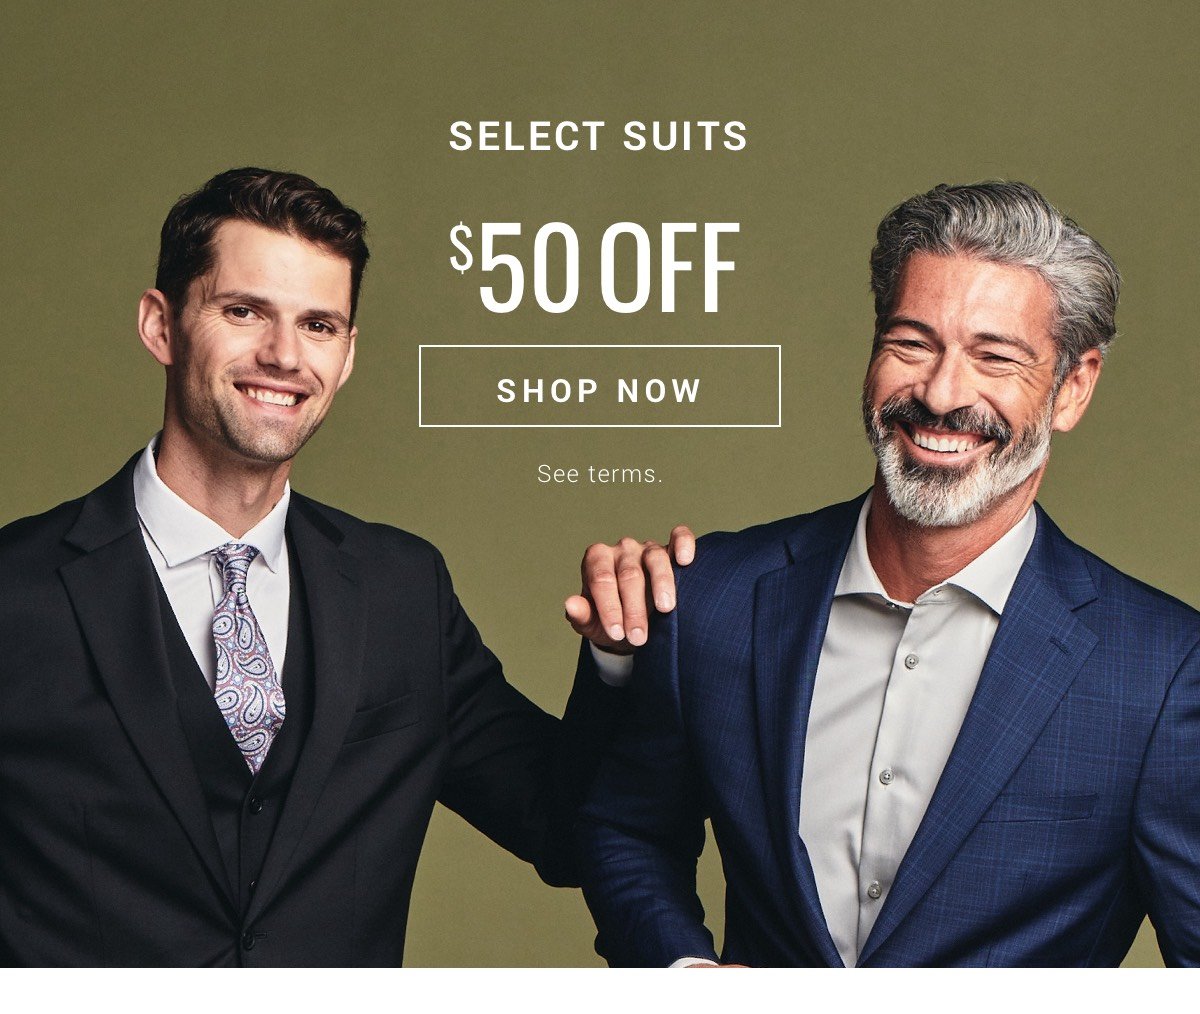 Select Suits 50 off